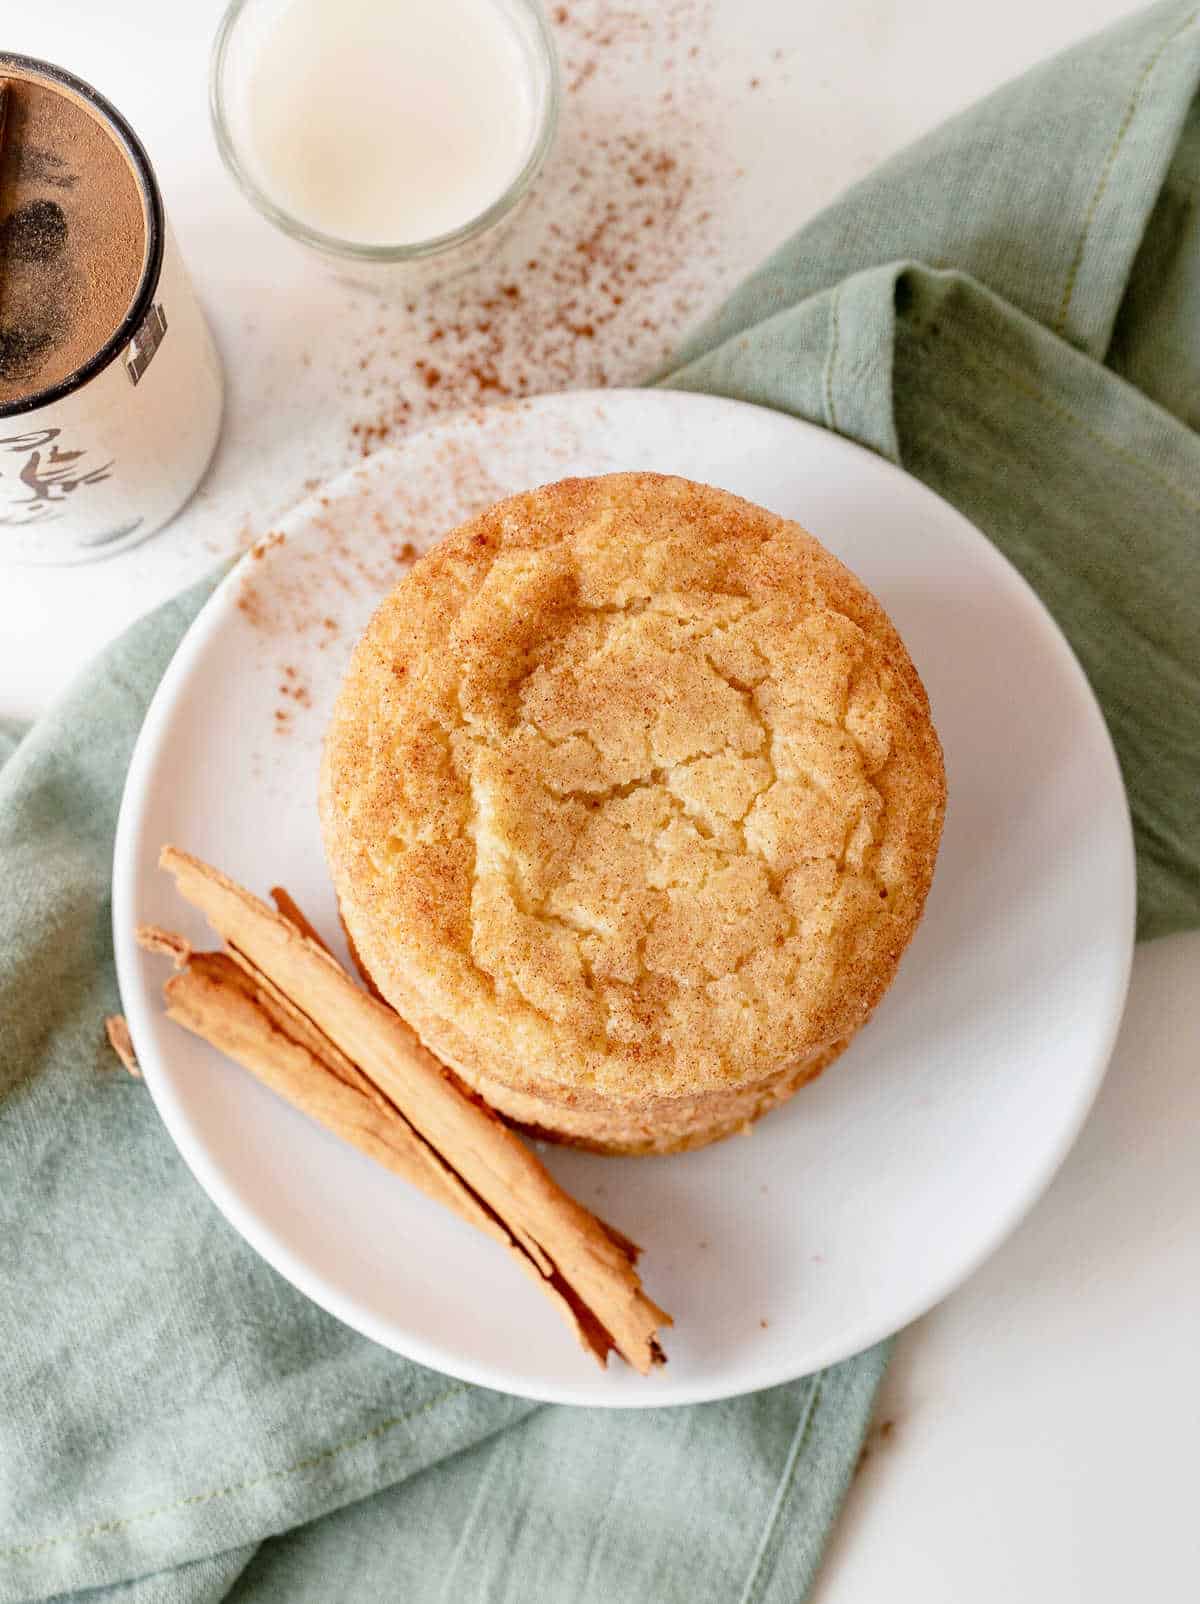 Top view of snickerdoodle cookies on a white plate with a cinnamon stick. Green cloth underneath, white surface.